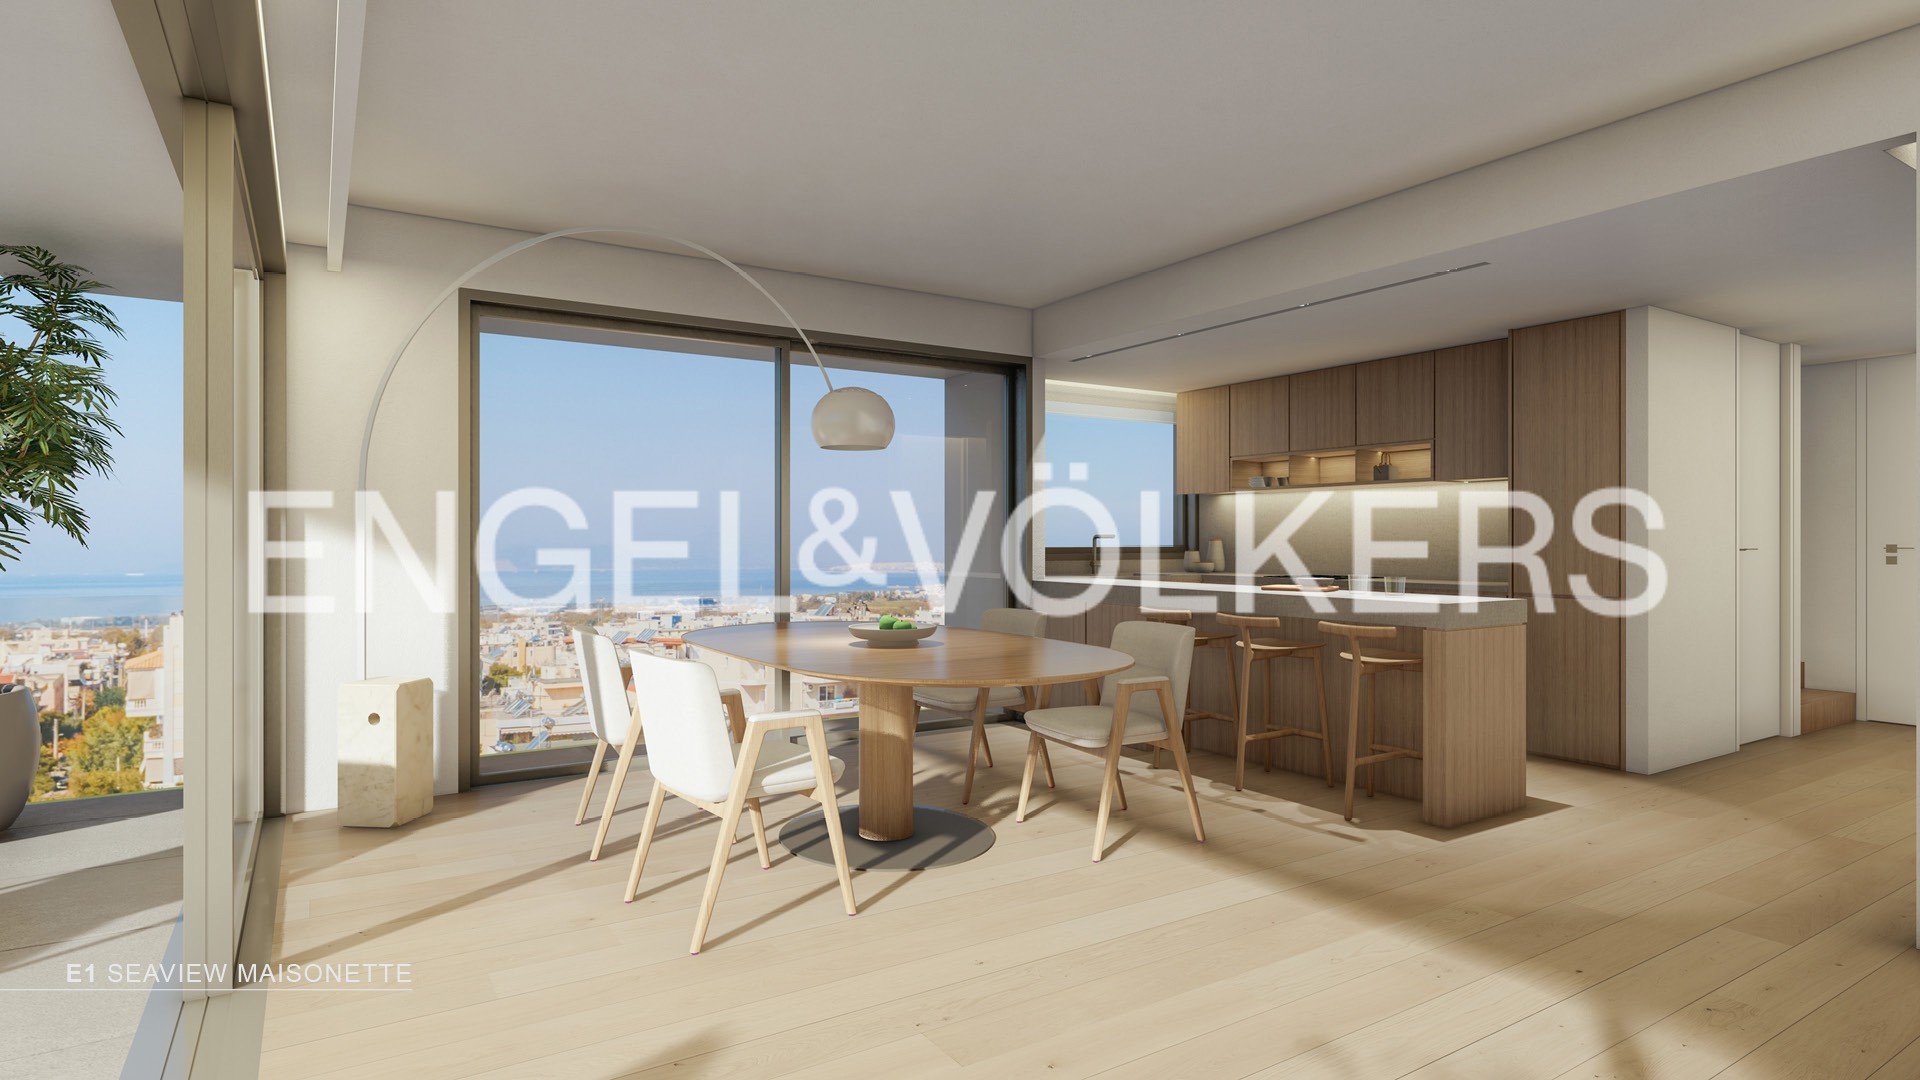 Modern 5th & 6th Floor Penthouse E1 Maisonette with Sea View